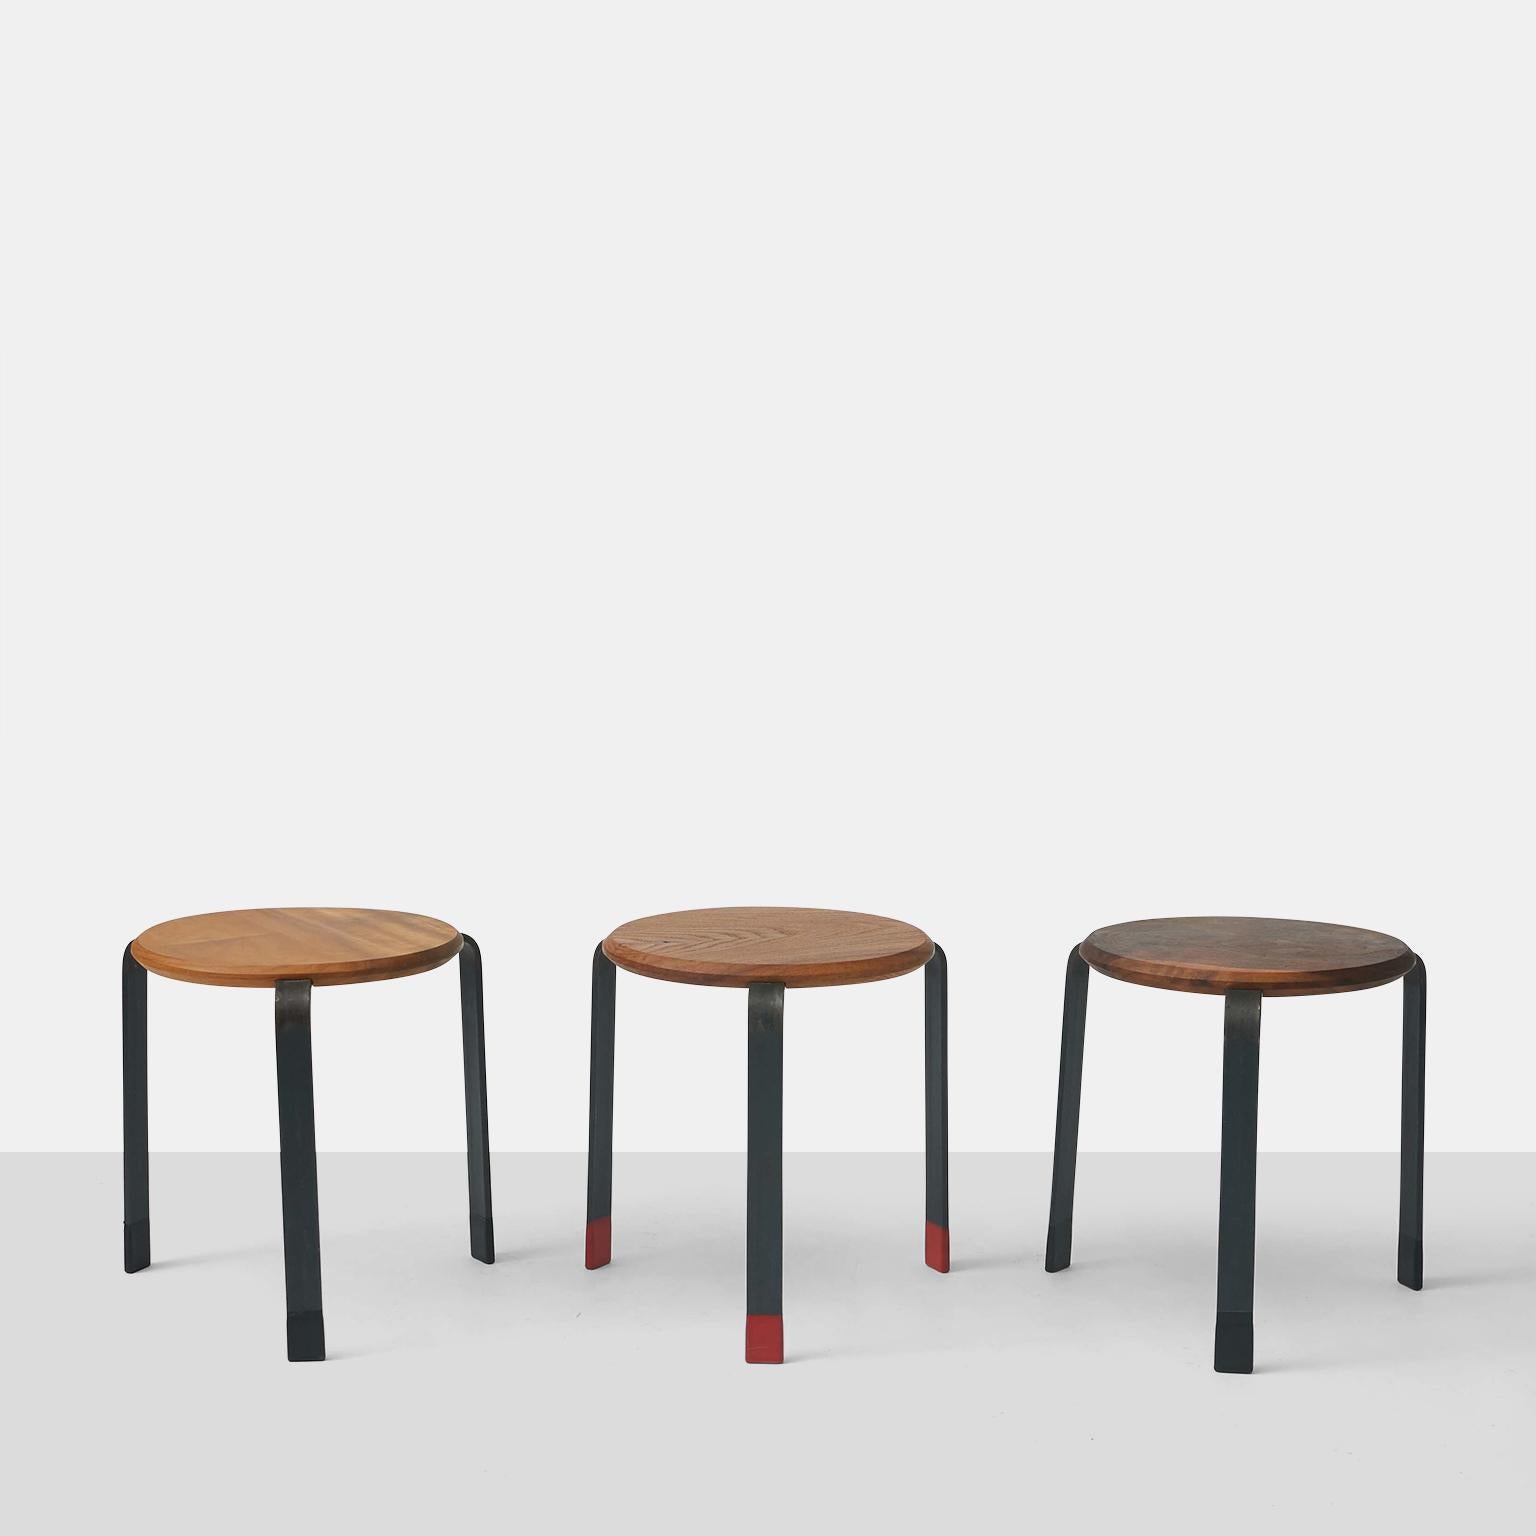 A pair of stools or small occasional tables of various woods. Each feature steel legs, with painted feet. Designed and manufactured in San Francisco by Josh Duthie. Have only the black feet left. 
Price for the pair. 